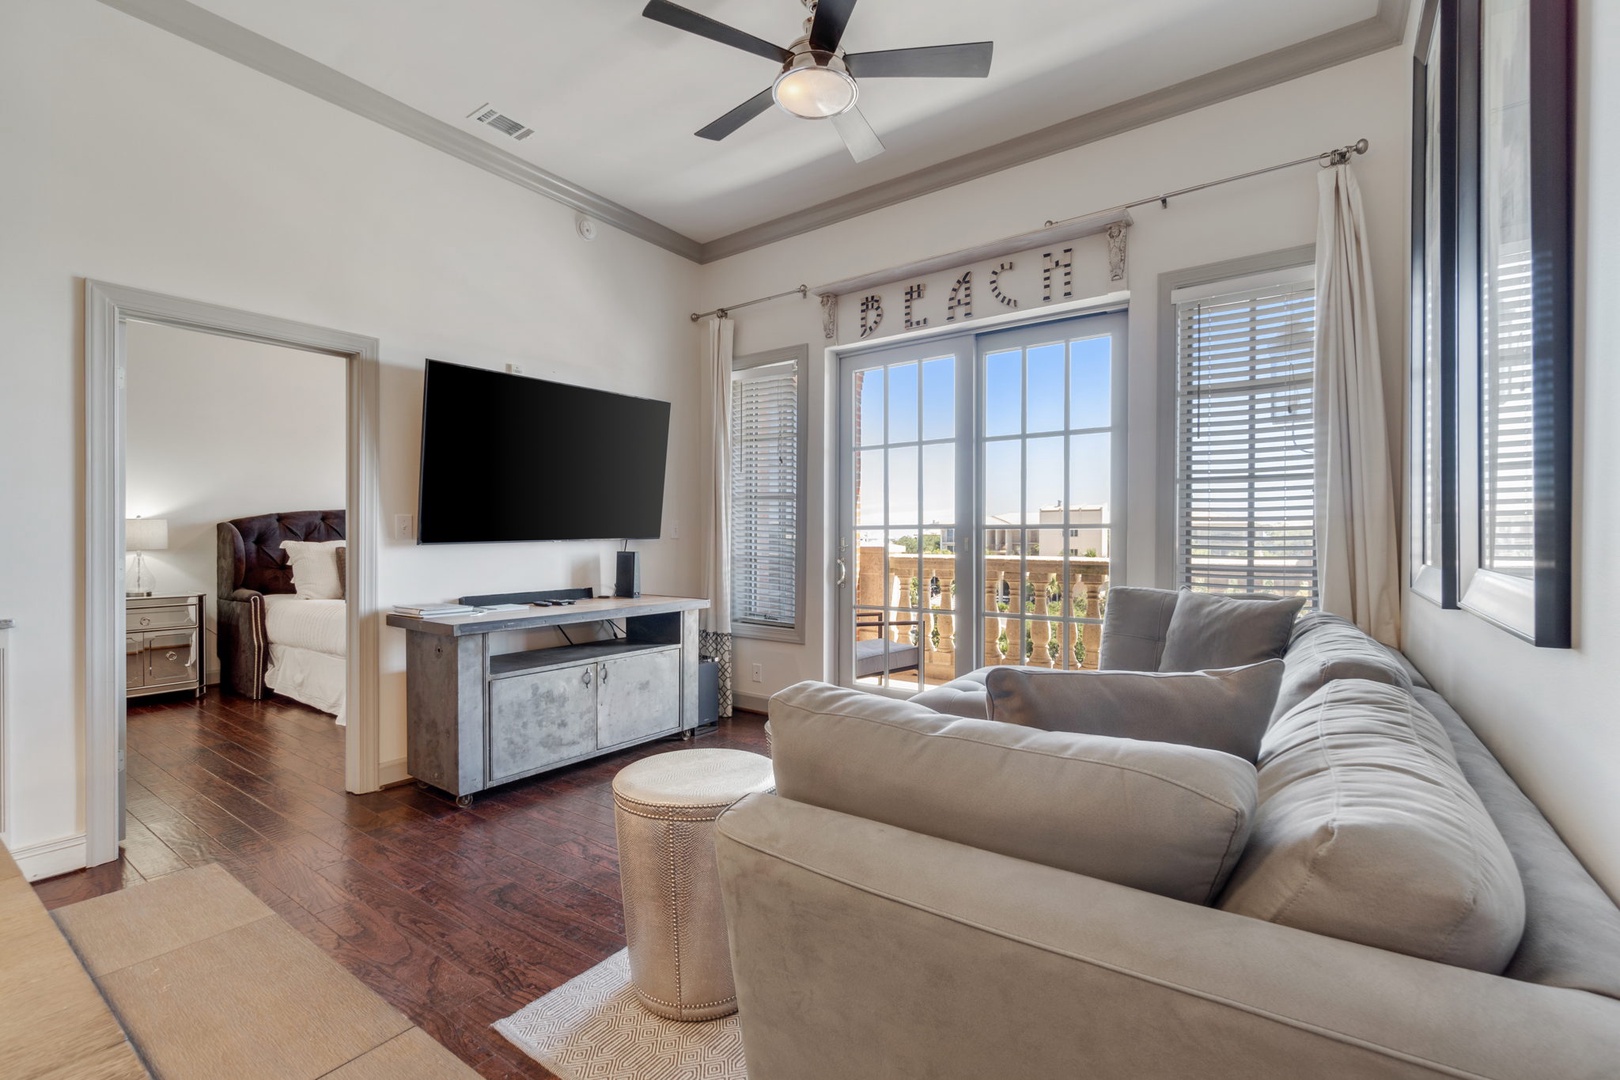 The living room has a large flat screen TV, a sleeper sofa and a private balcony